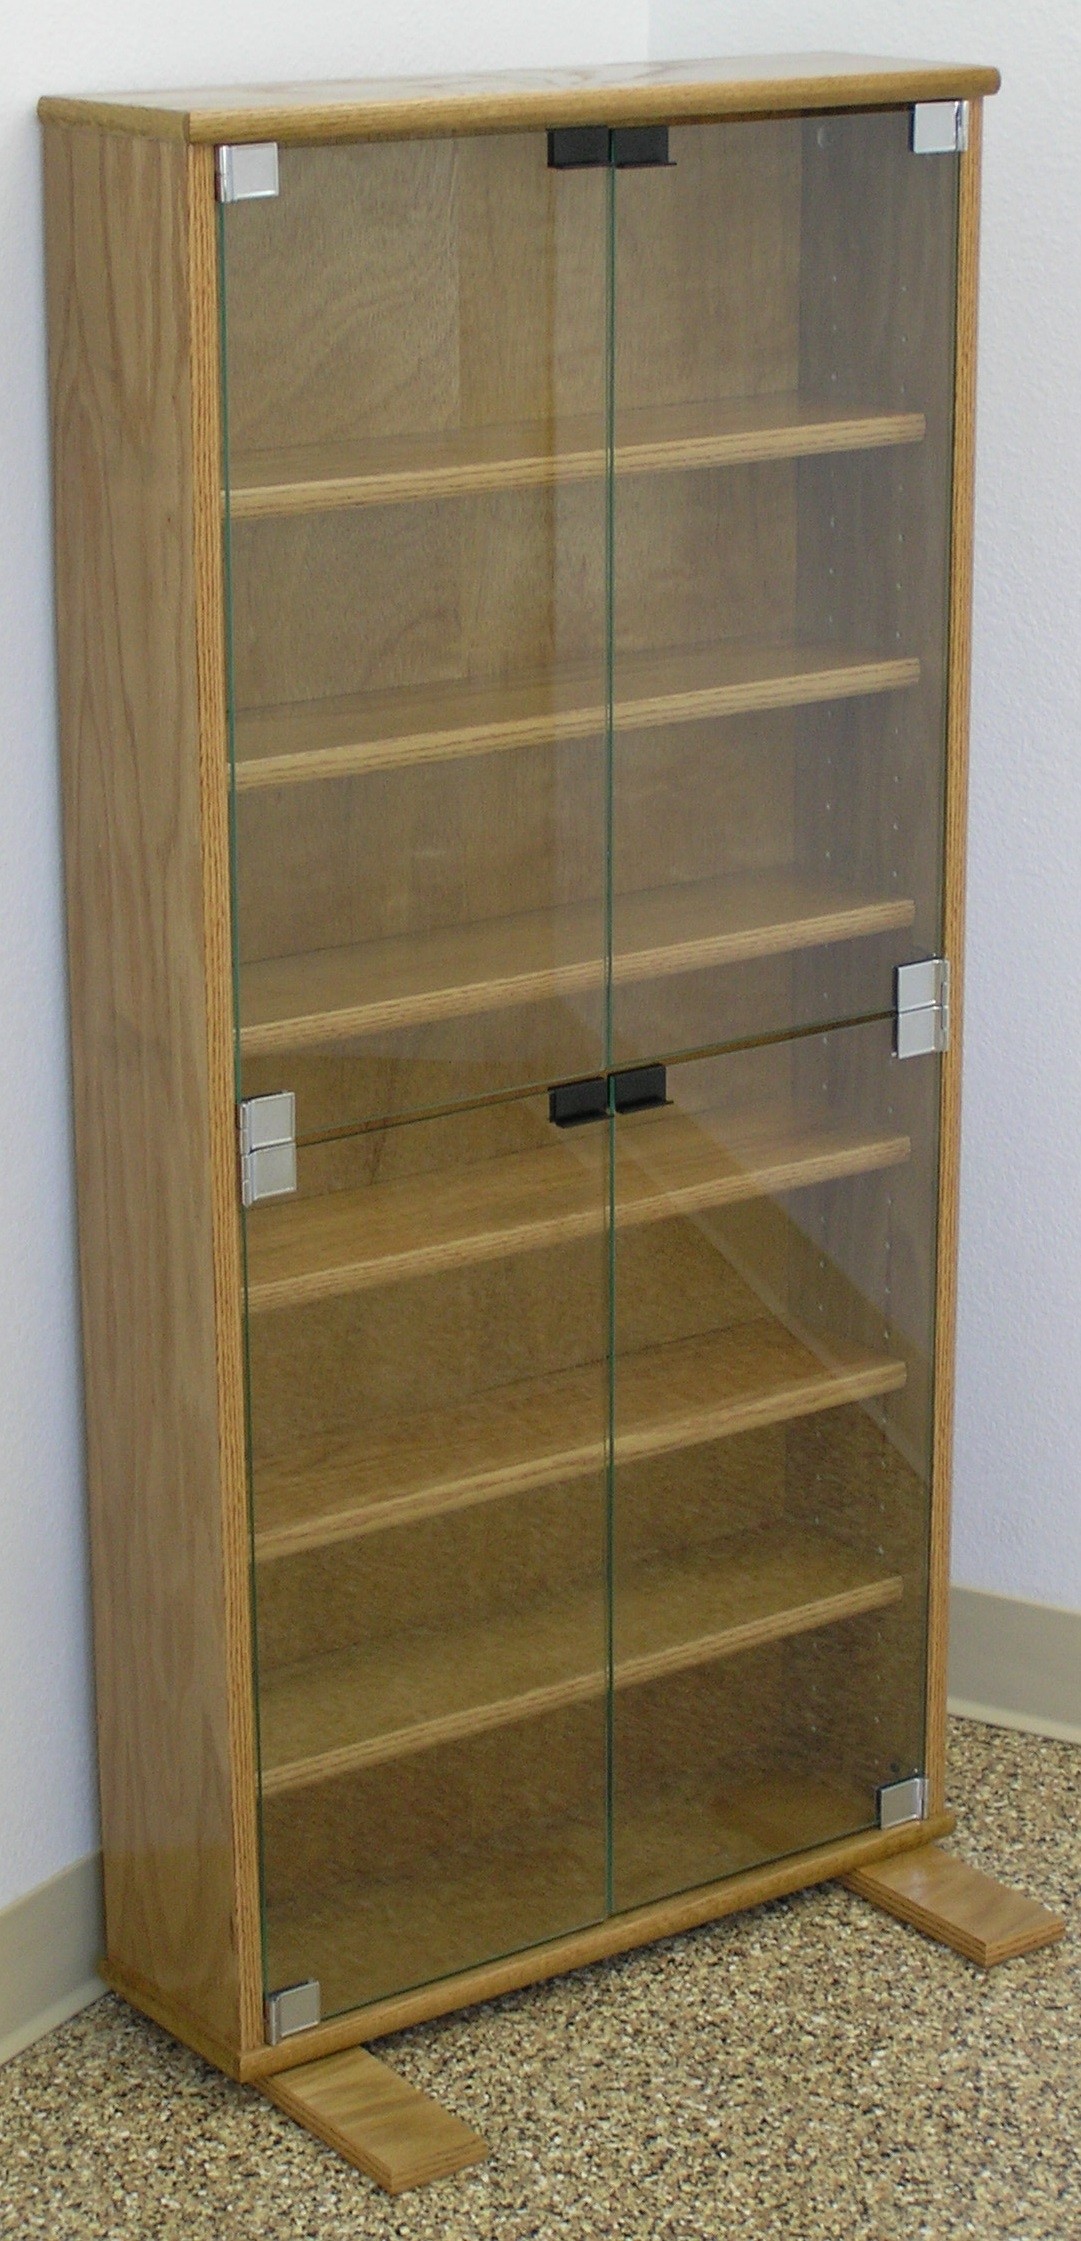 Dvd bookcase with glass doors in oak or maple by